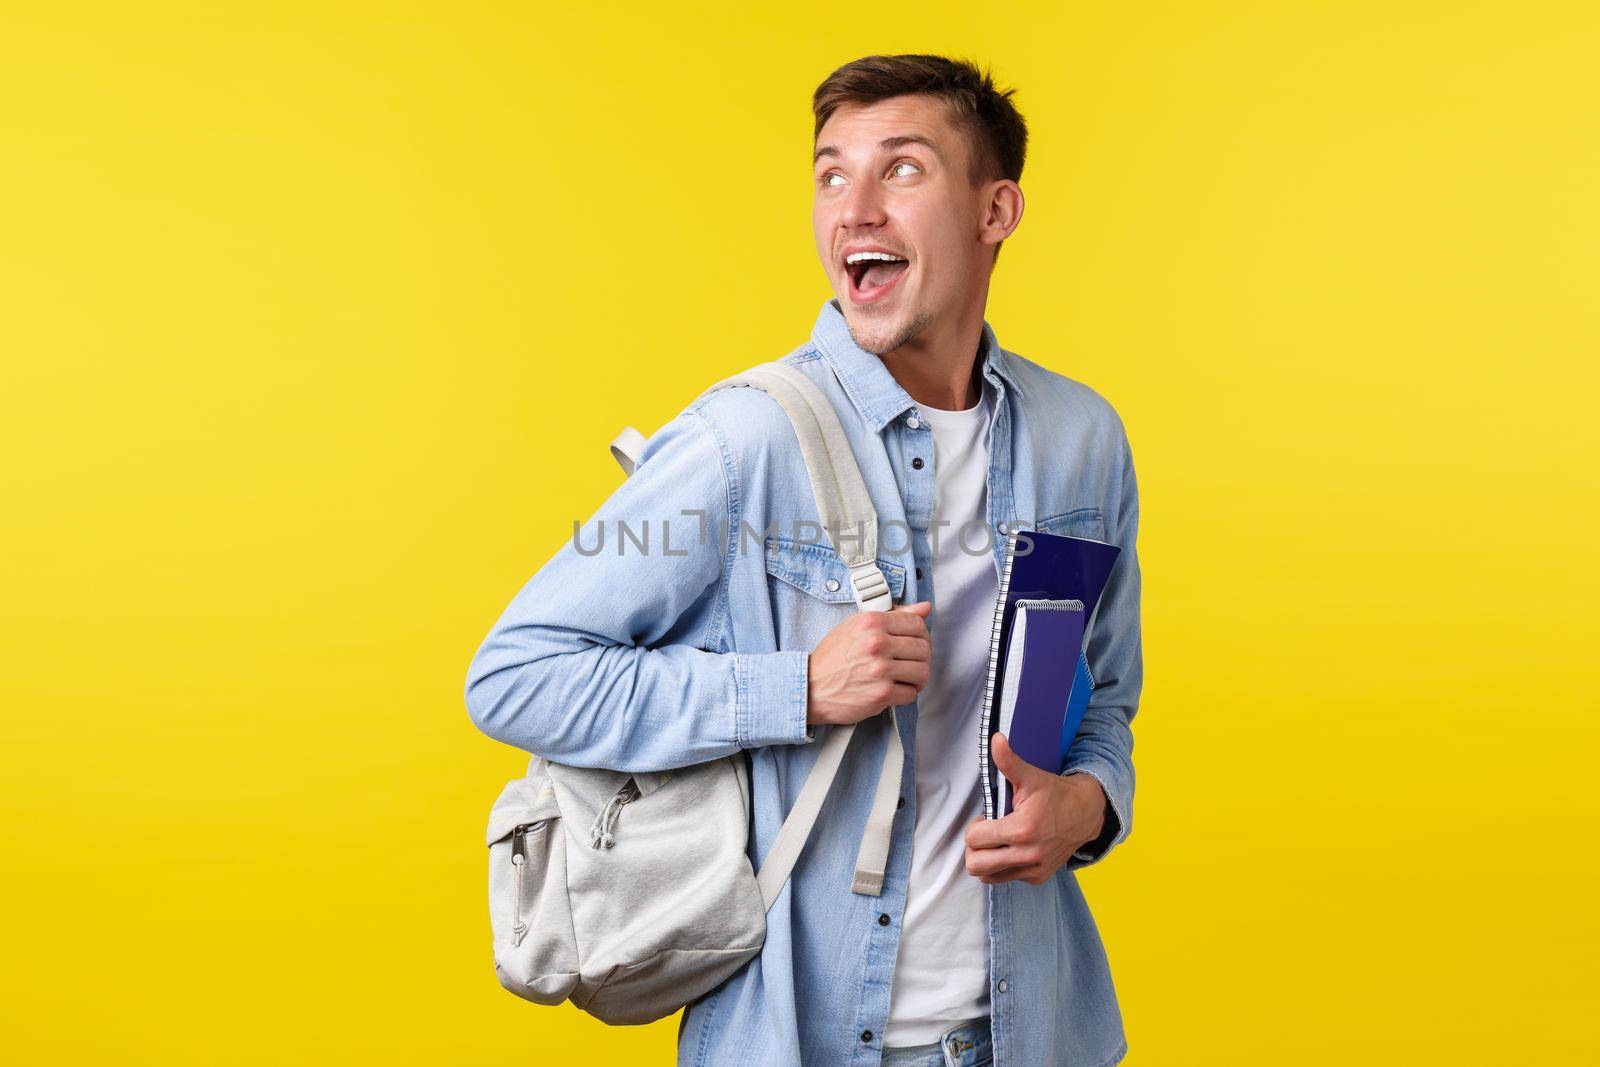 Education, courses and university concept. Excited happy smiling handsome student turn back at upper left corner while heading to classes with backpack and notebooks, yellow background.